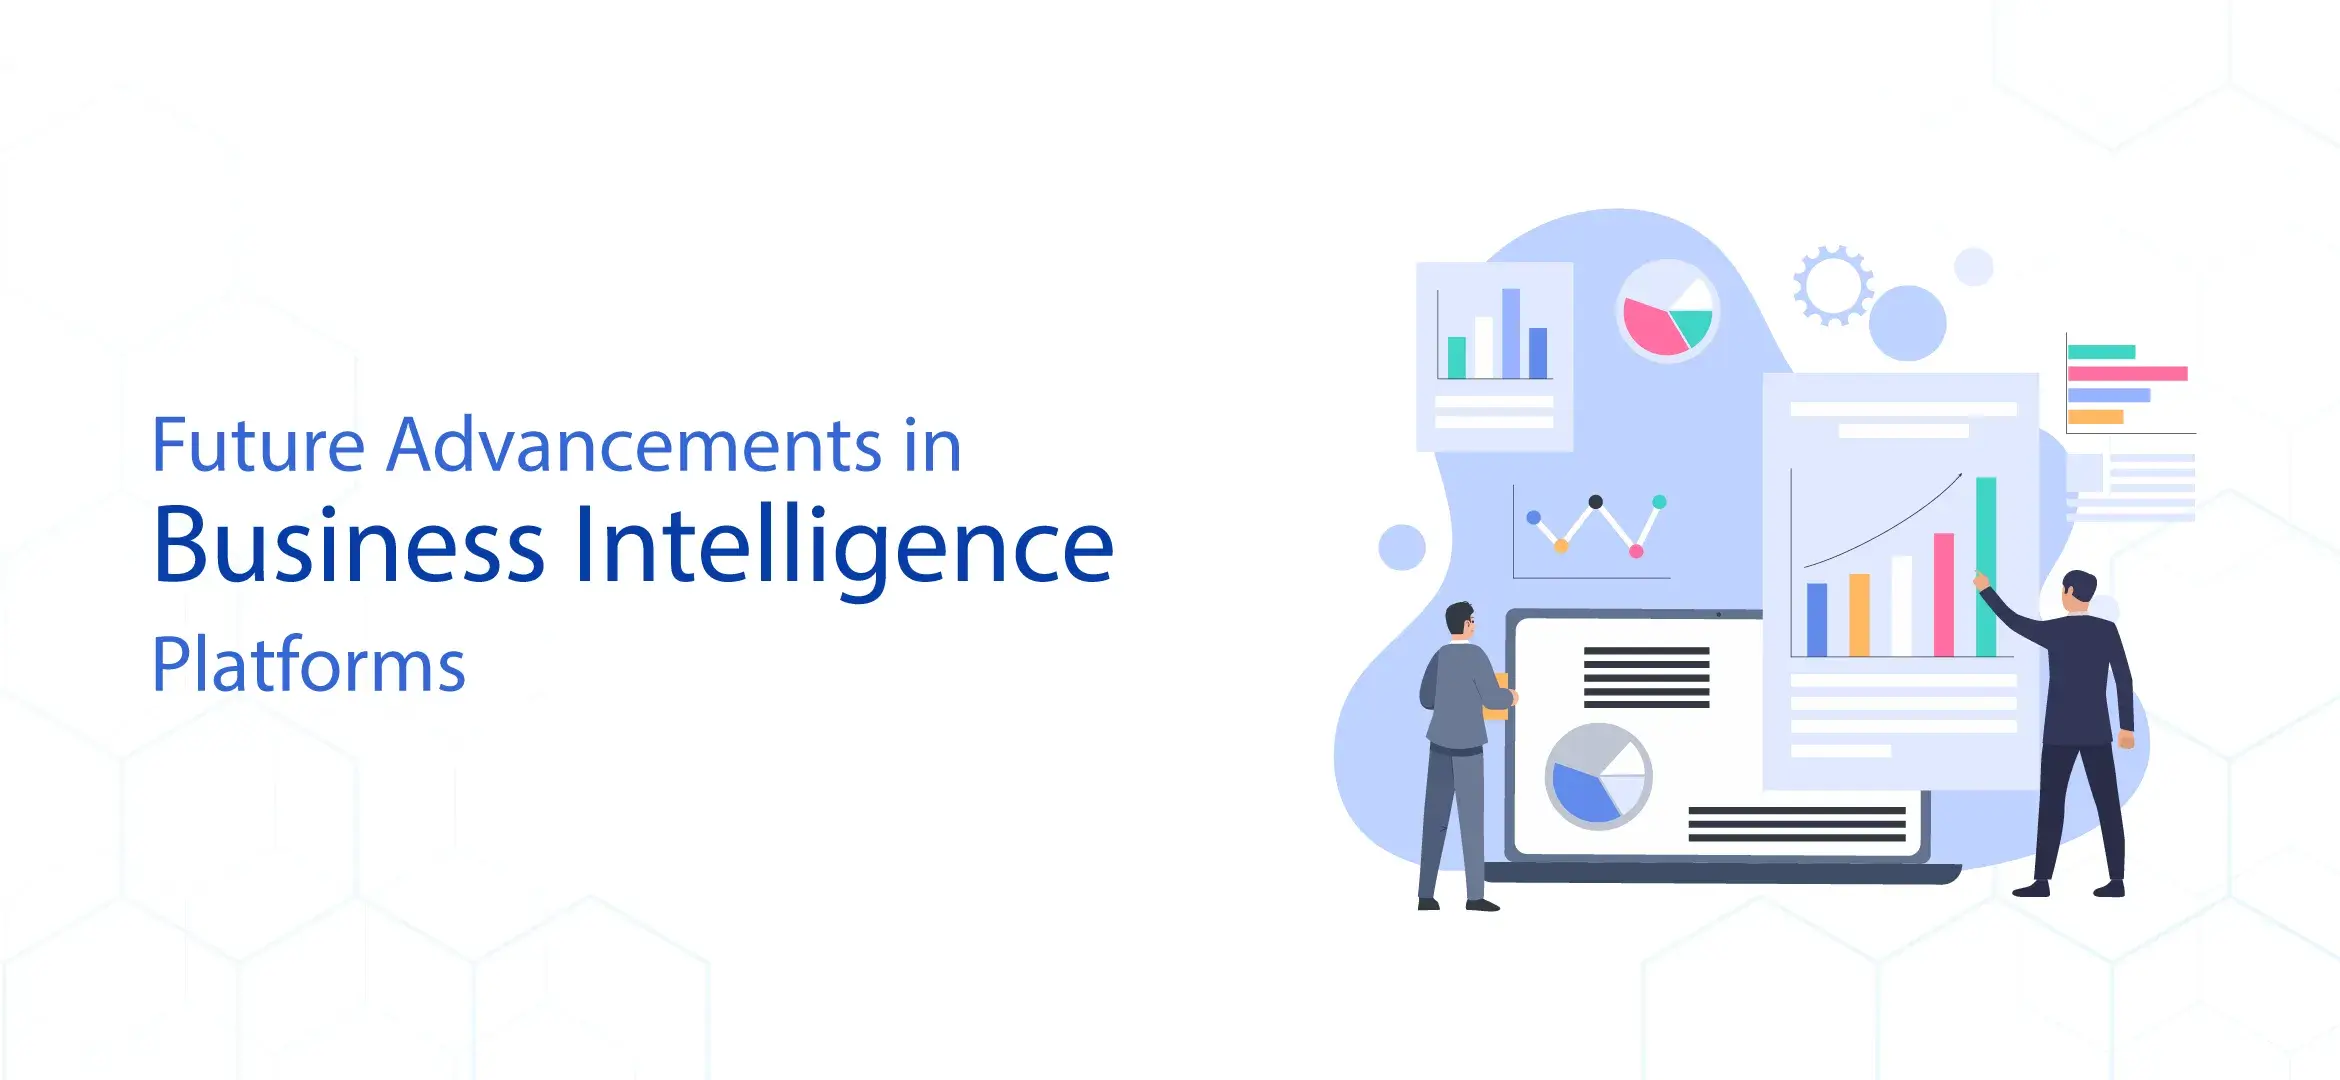 Future Advancements in Business Intelligence Platforms